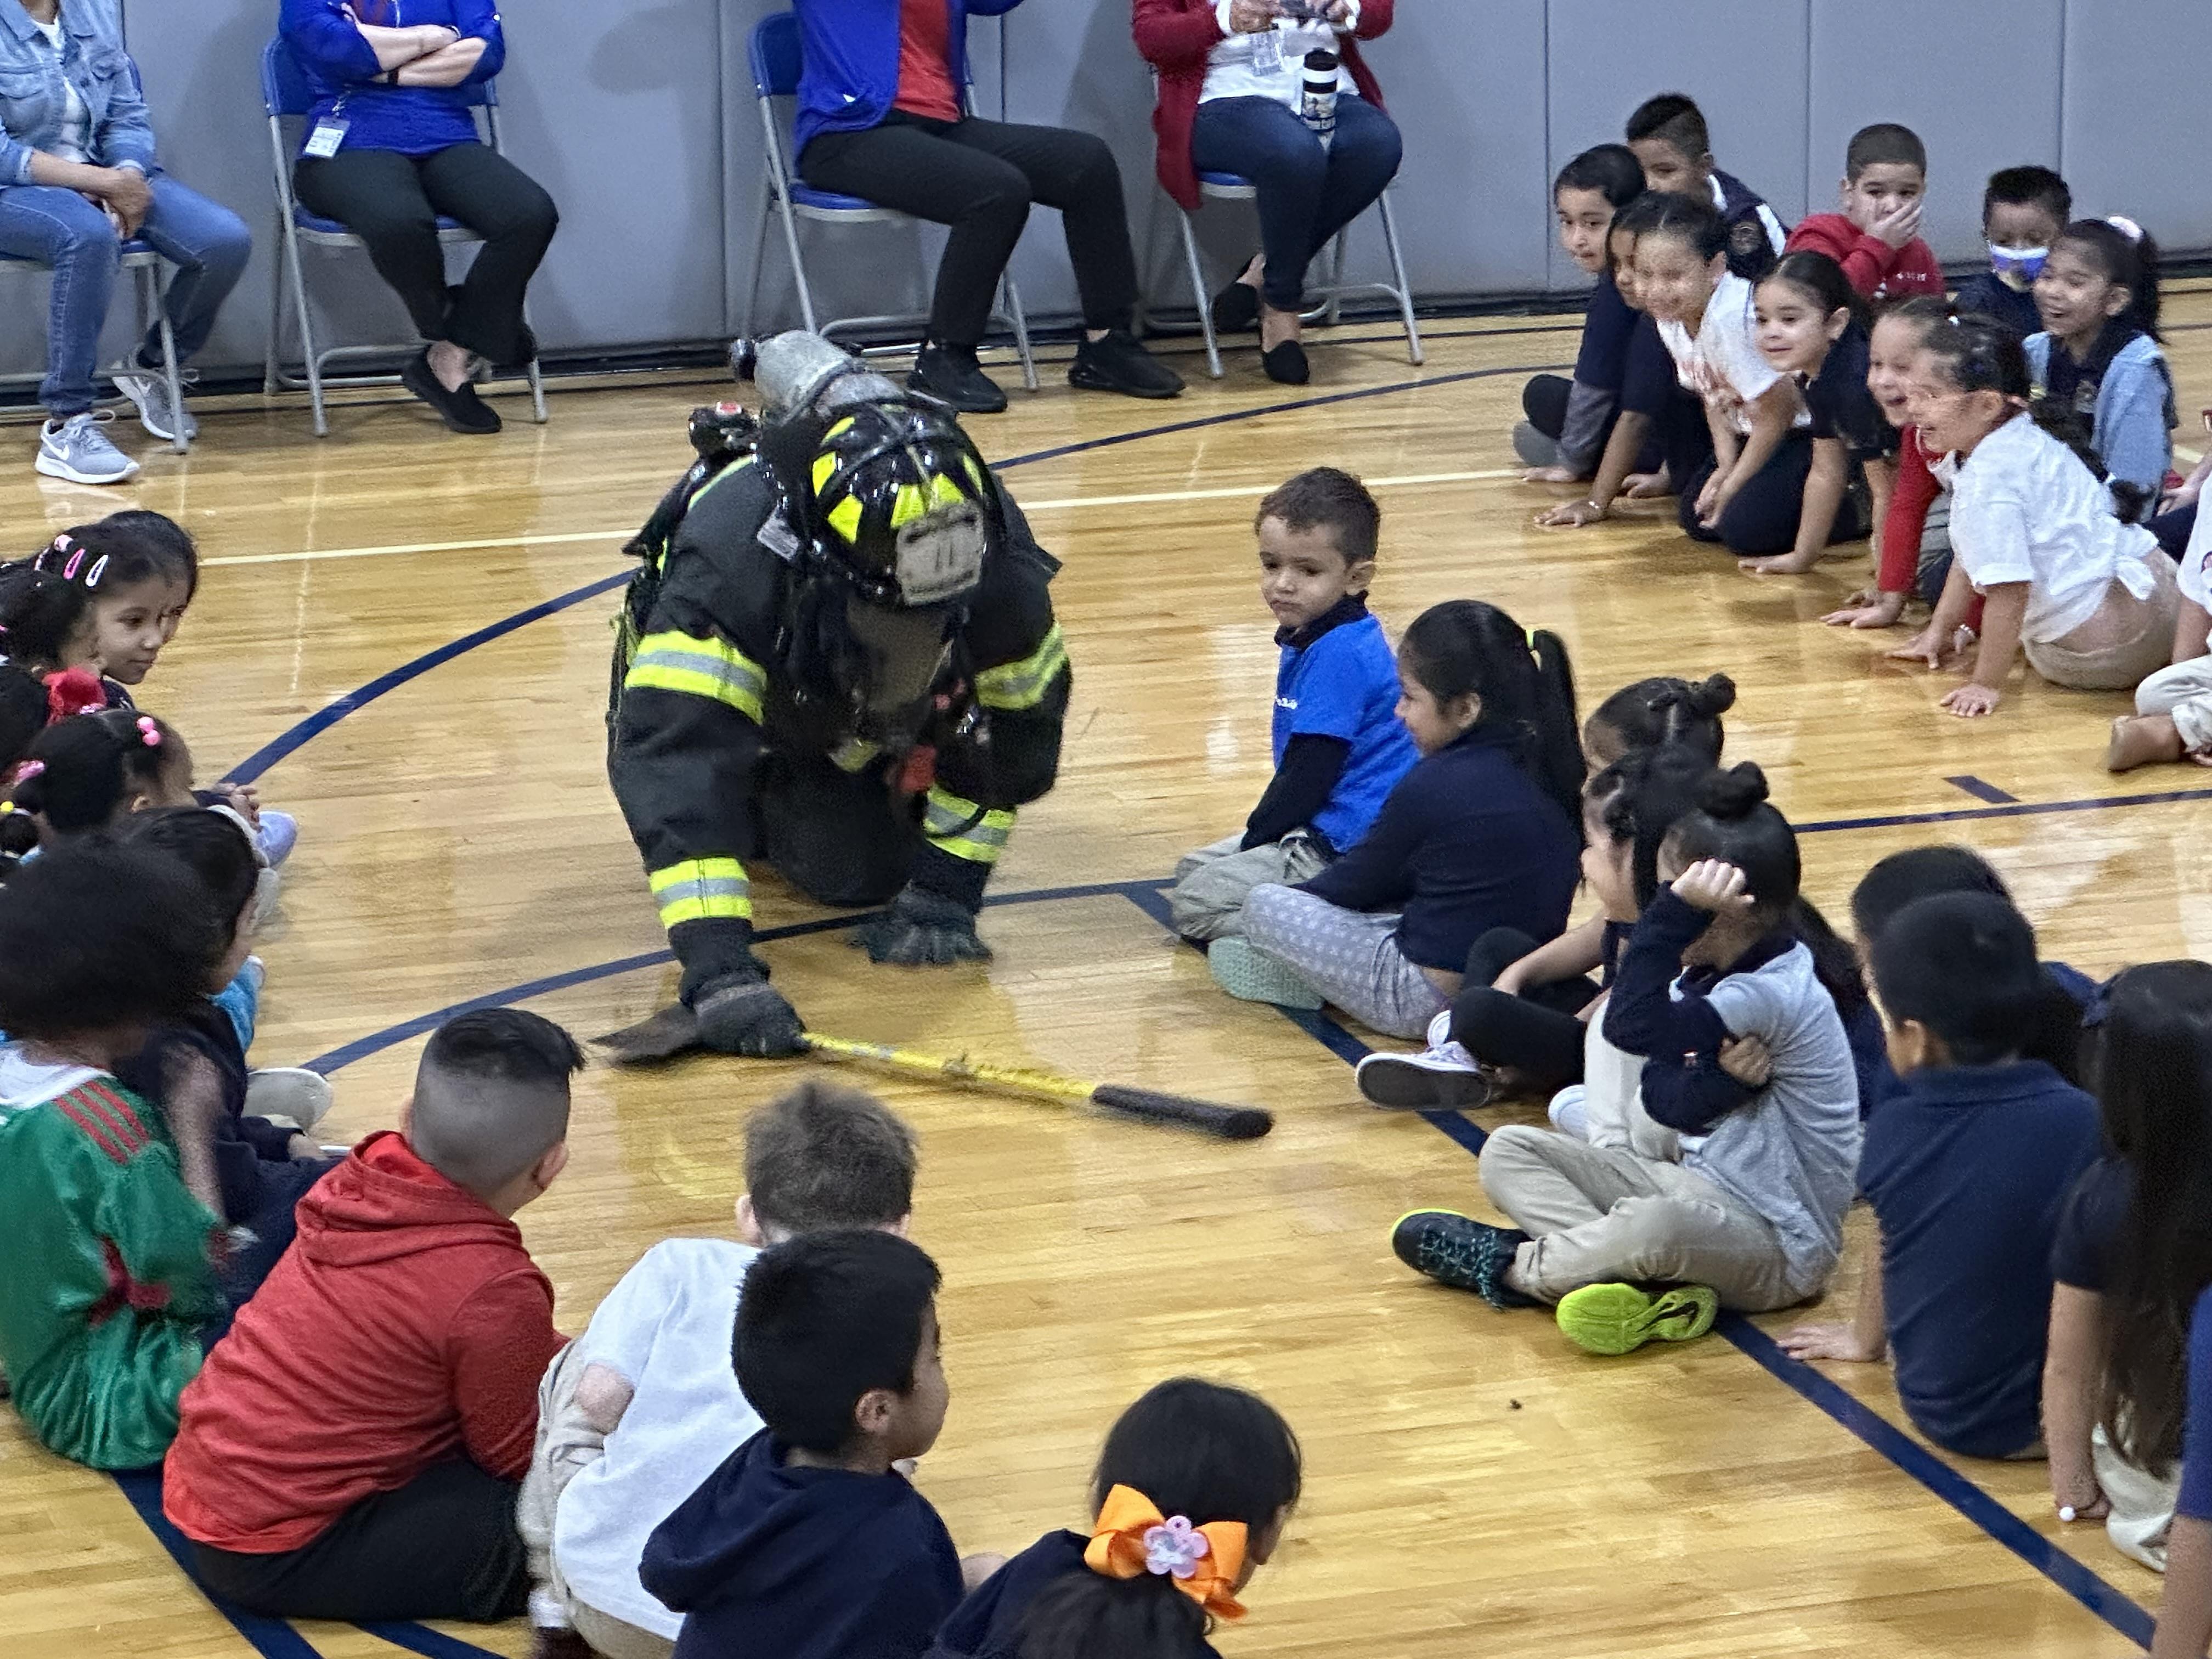 Fire Safety at the Washington School